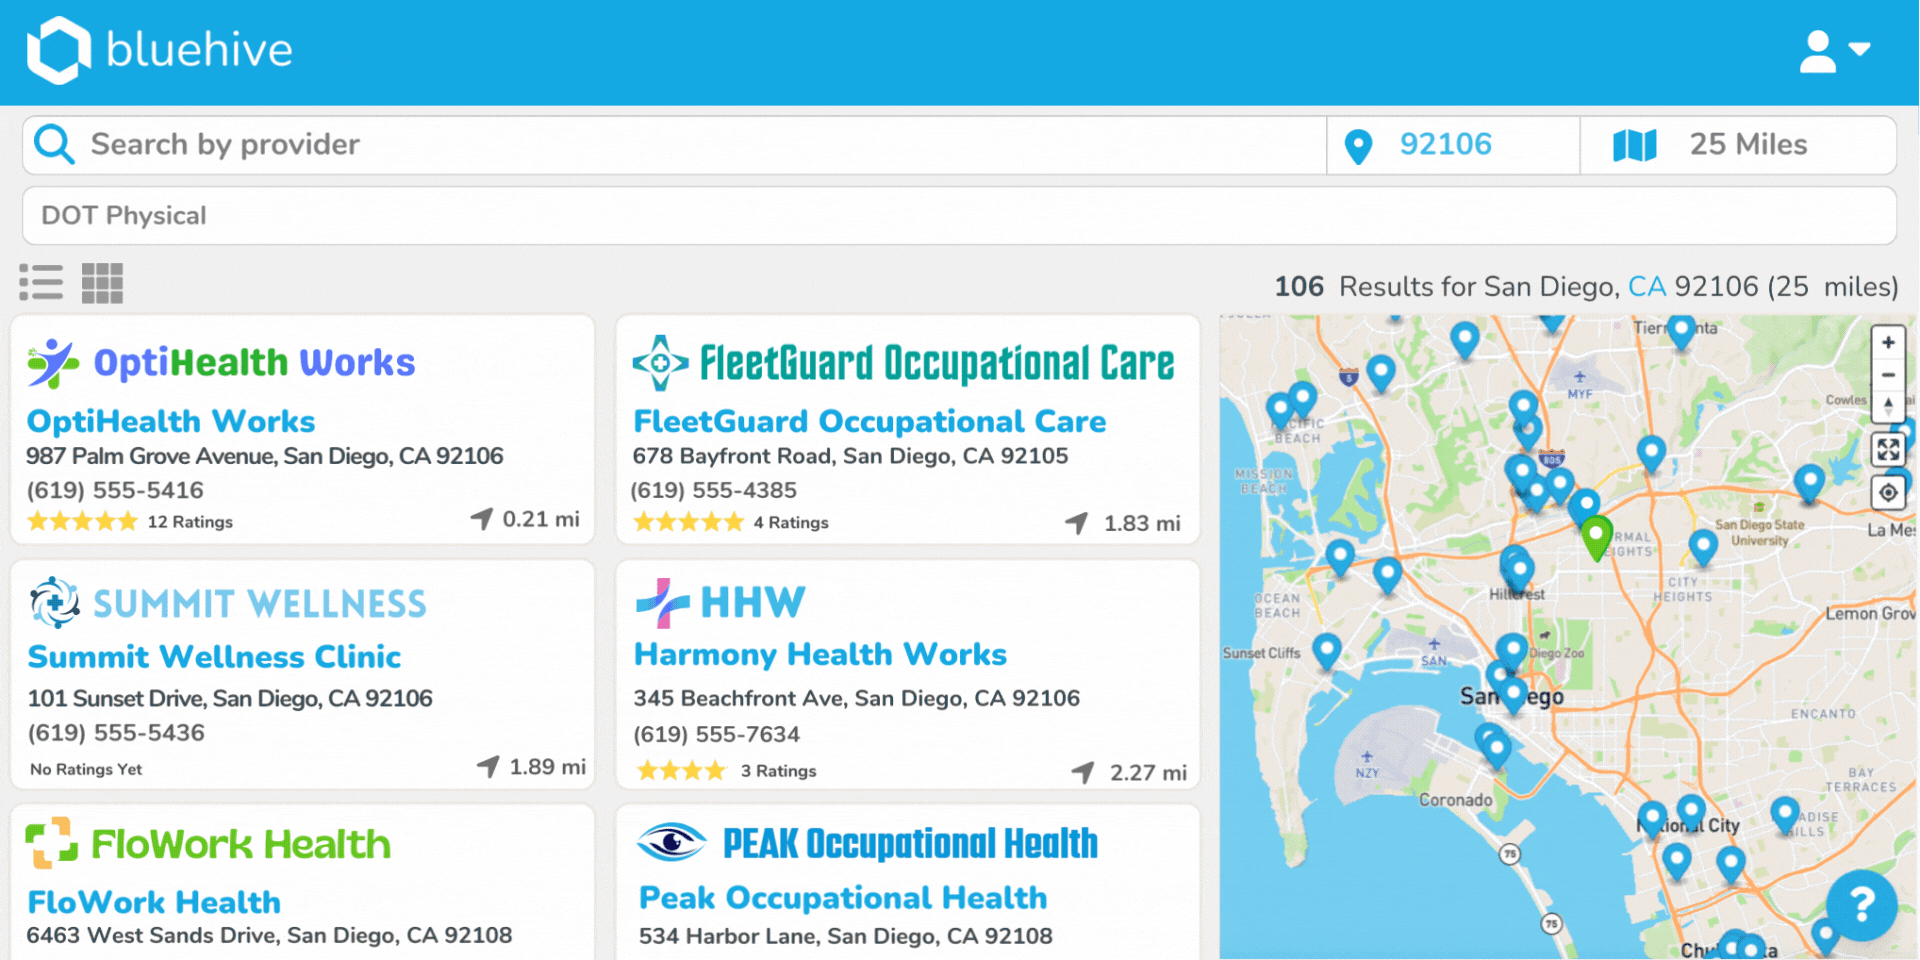 BlueHive: The occupational health ecosystem